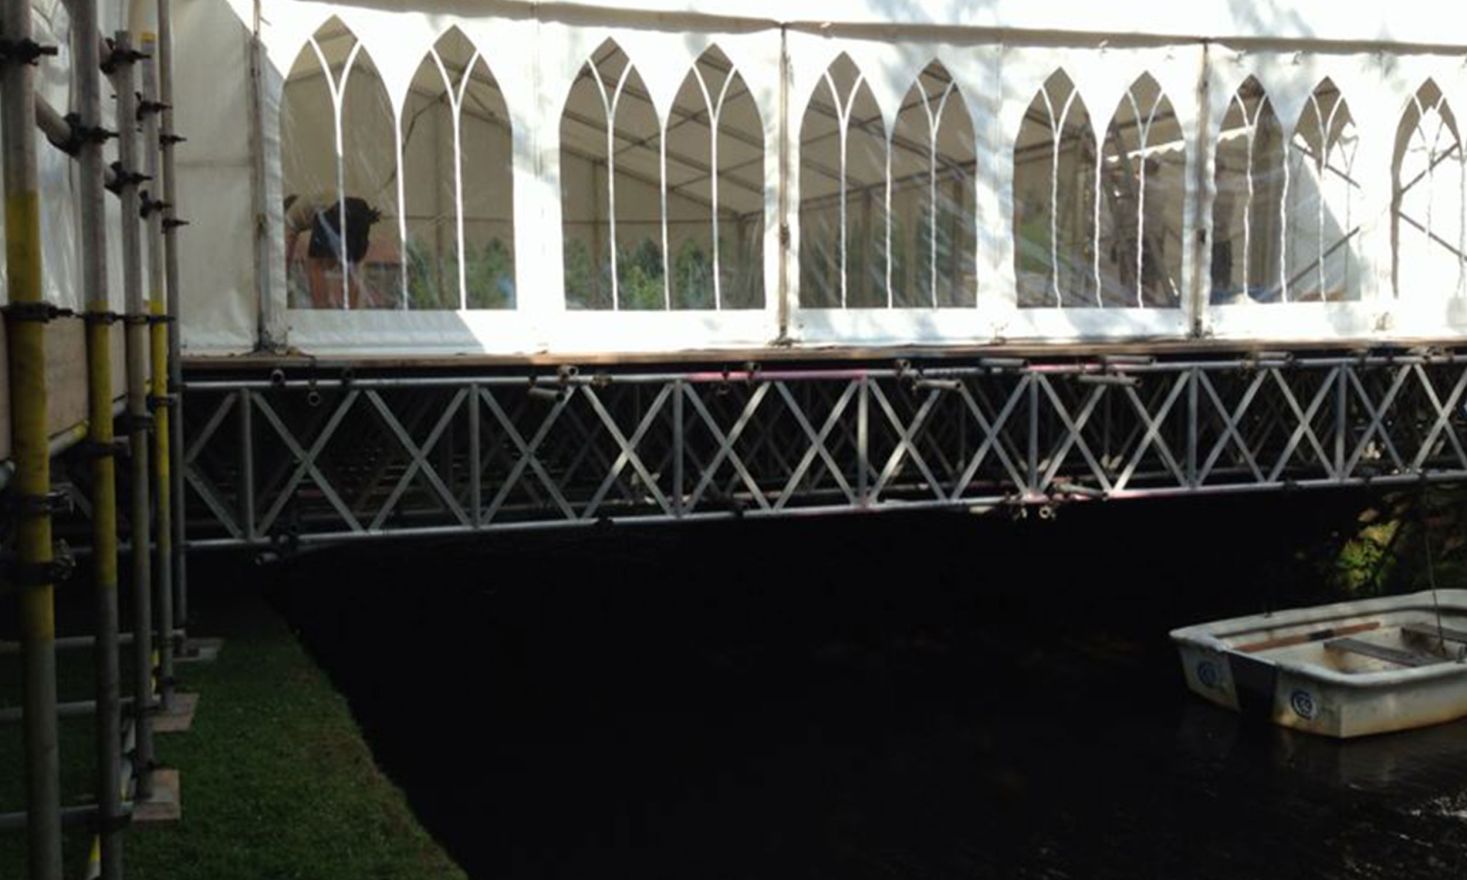 Littlebeck, Whitby - Beamed Marquee Support Scaffold over the River